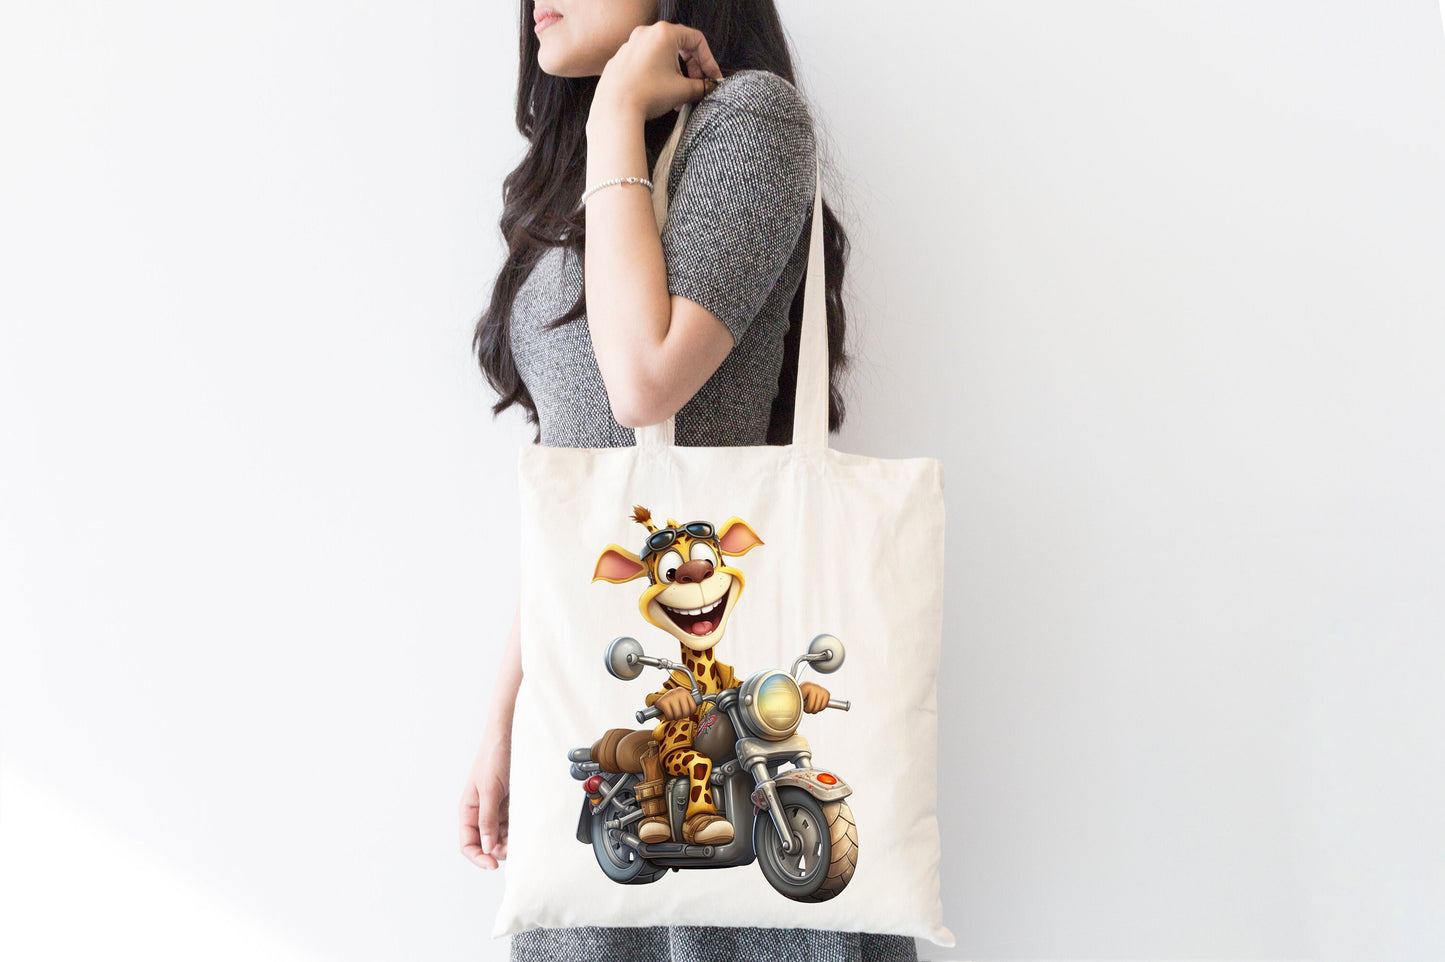 Giraffe on a Motorcycle: Quirky Adventure Sublimation